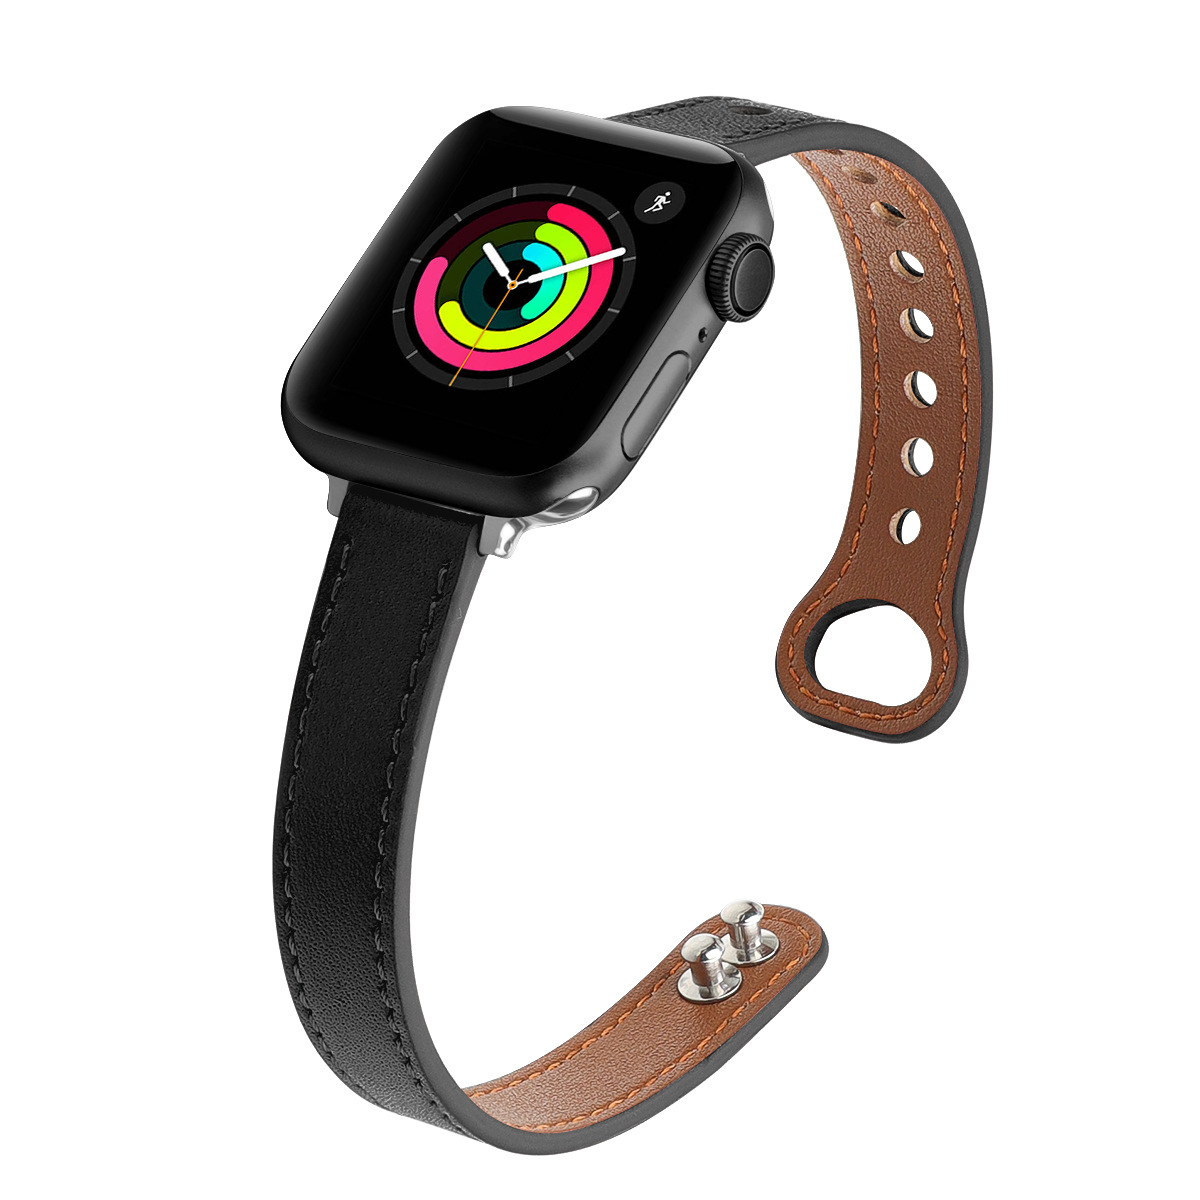 Suitable for Apple Watch345678 Generation Belt IWatch Leather Strap Double Nail Wrist Strap Apple Strap